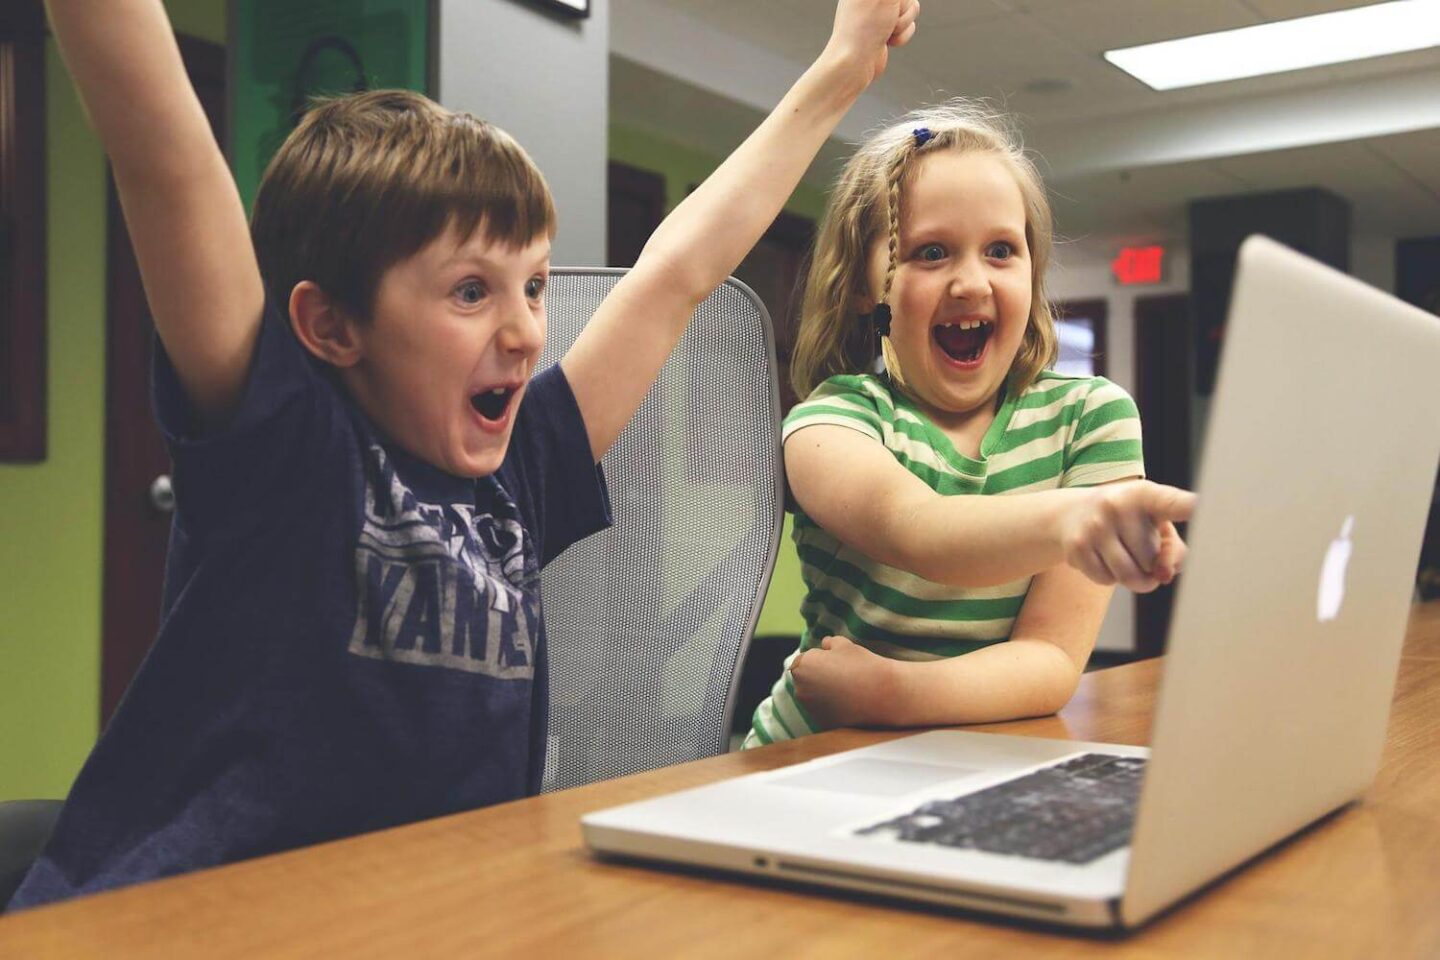 2 children sit in front of a laptop. One is cheering and the other is point at the screen with a big grin on their face